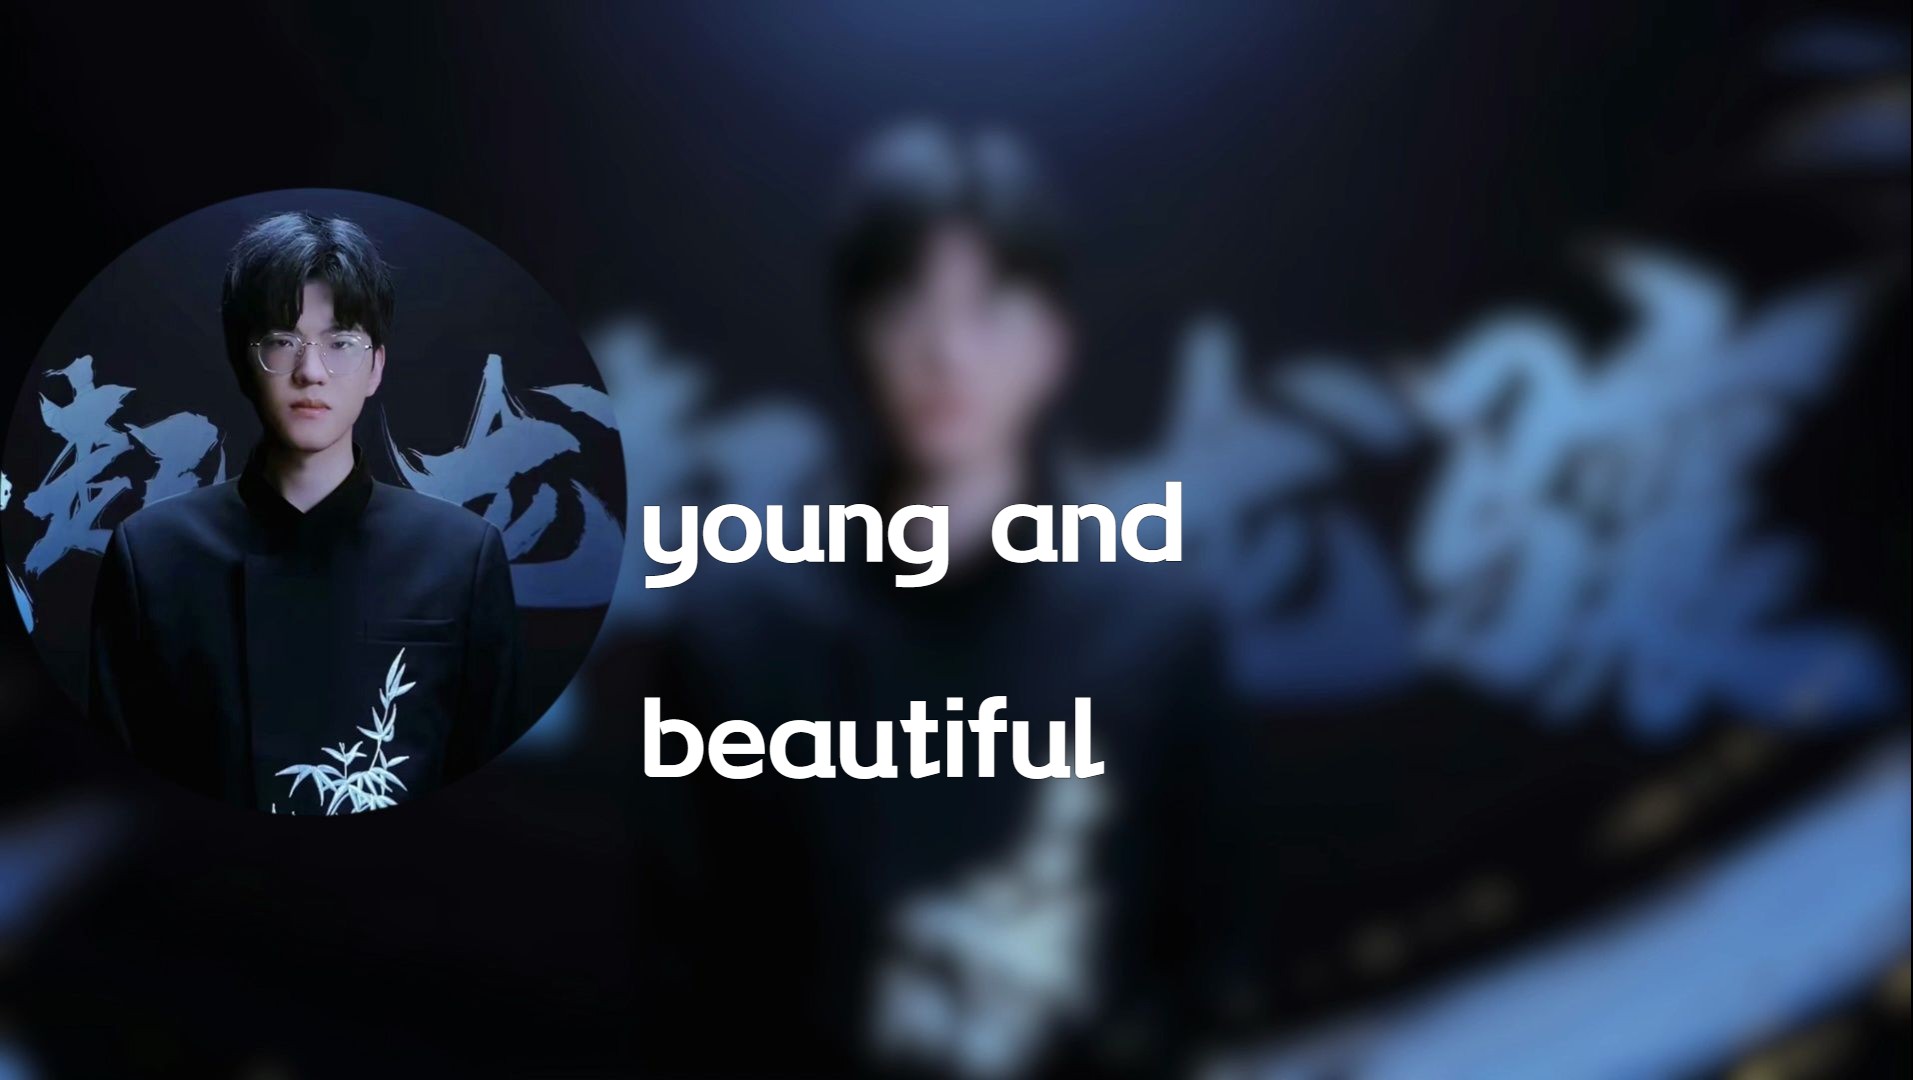 【AI赵礼杰】young and beautiful